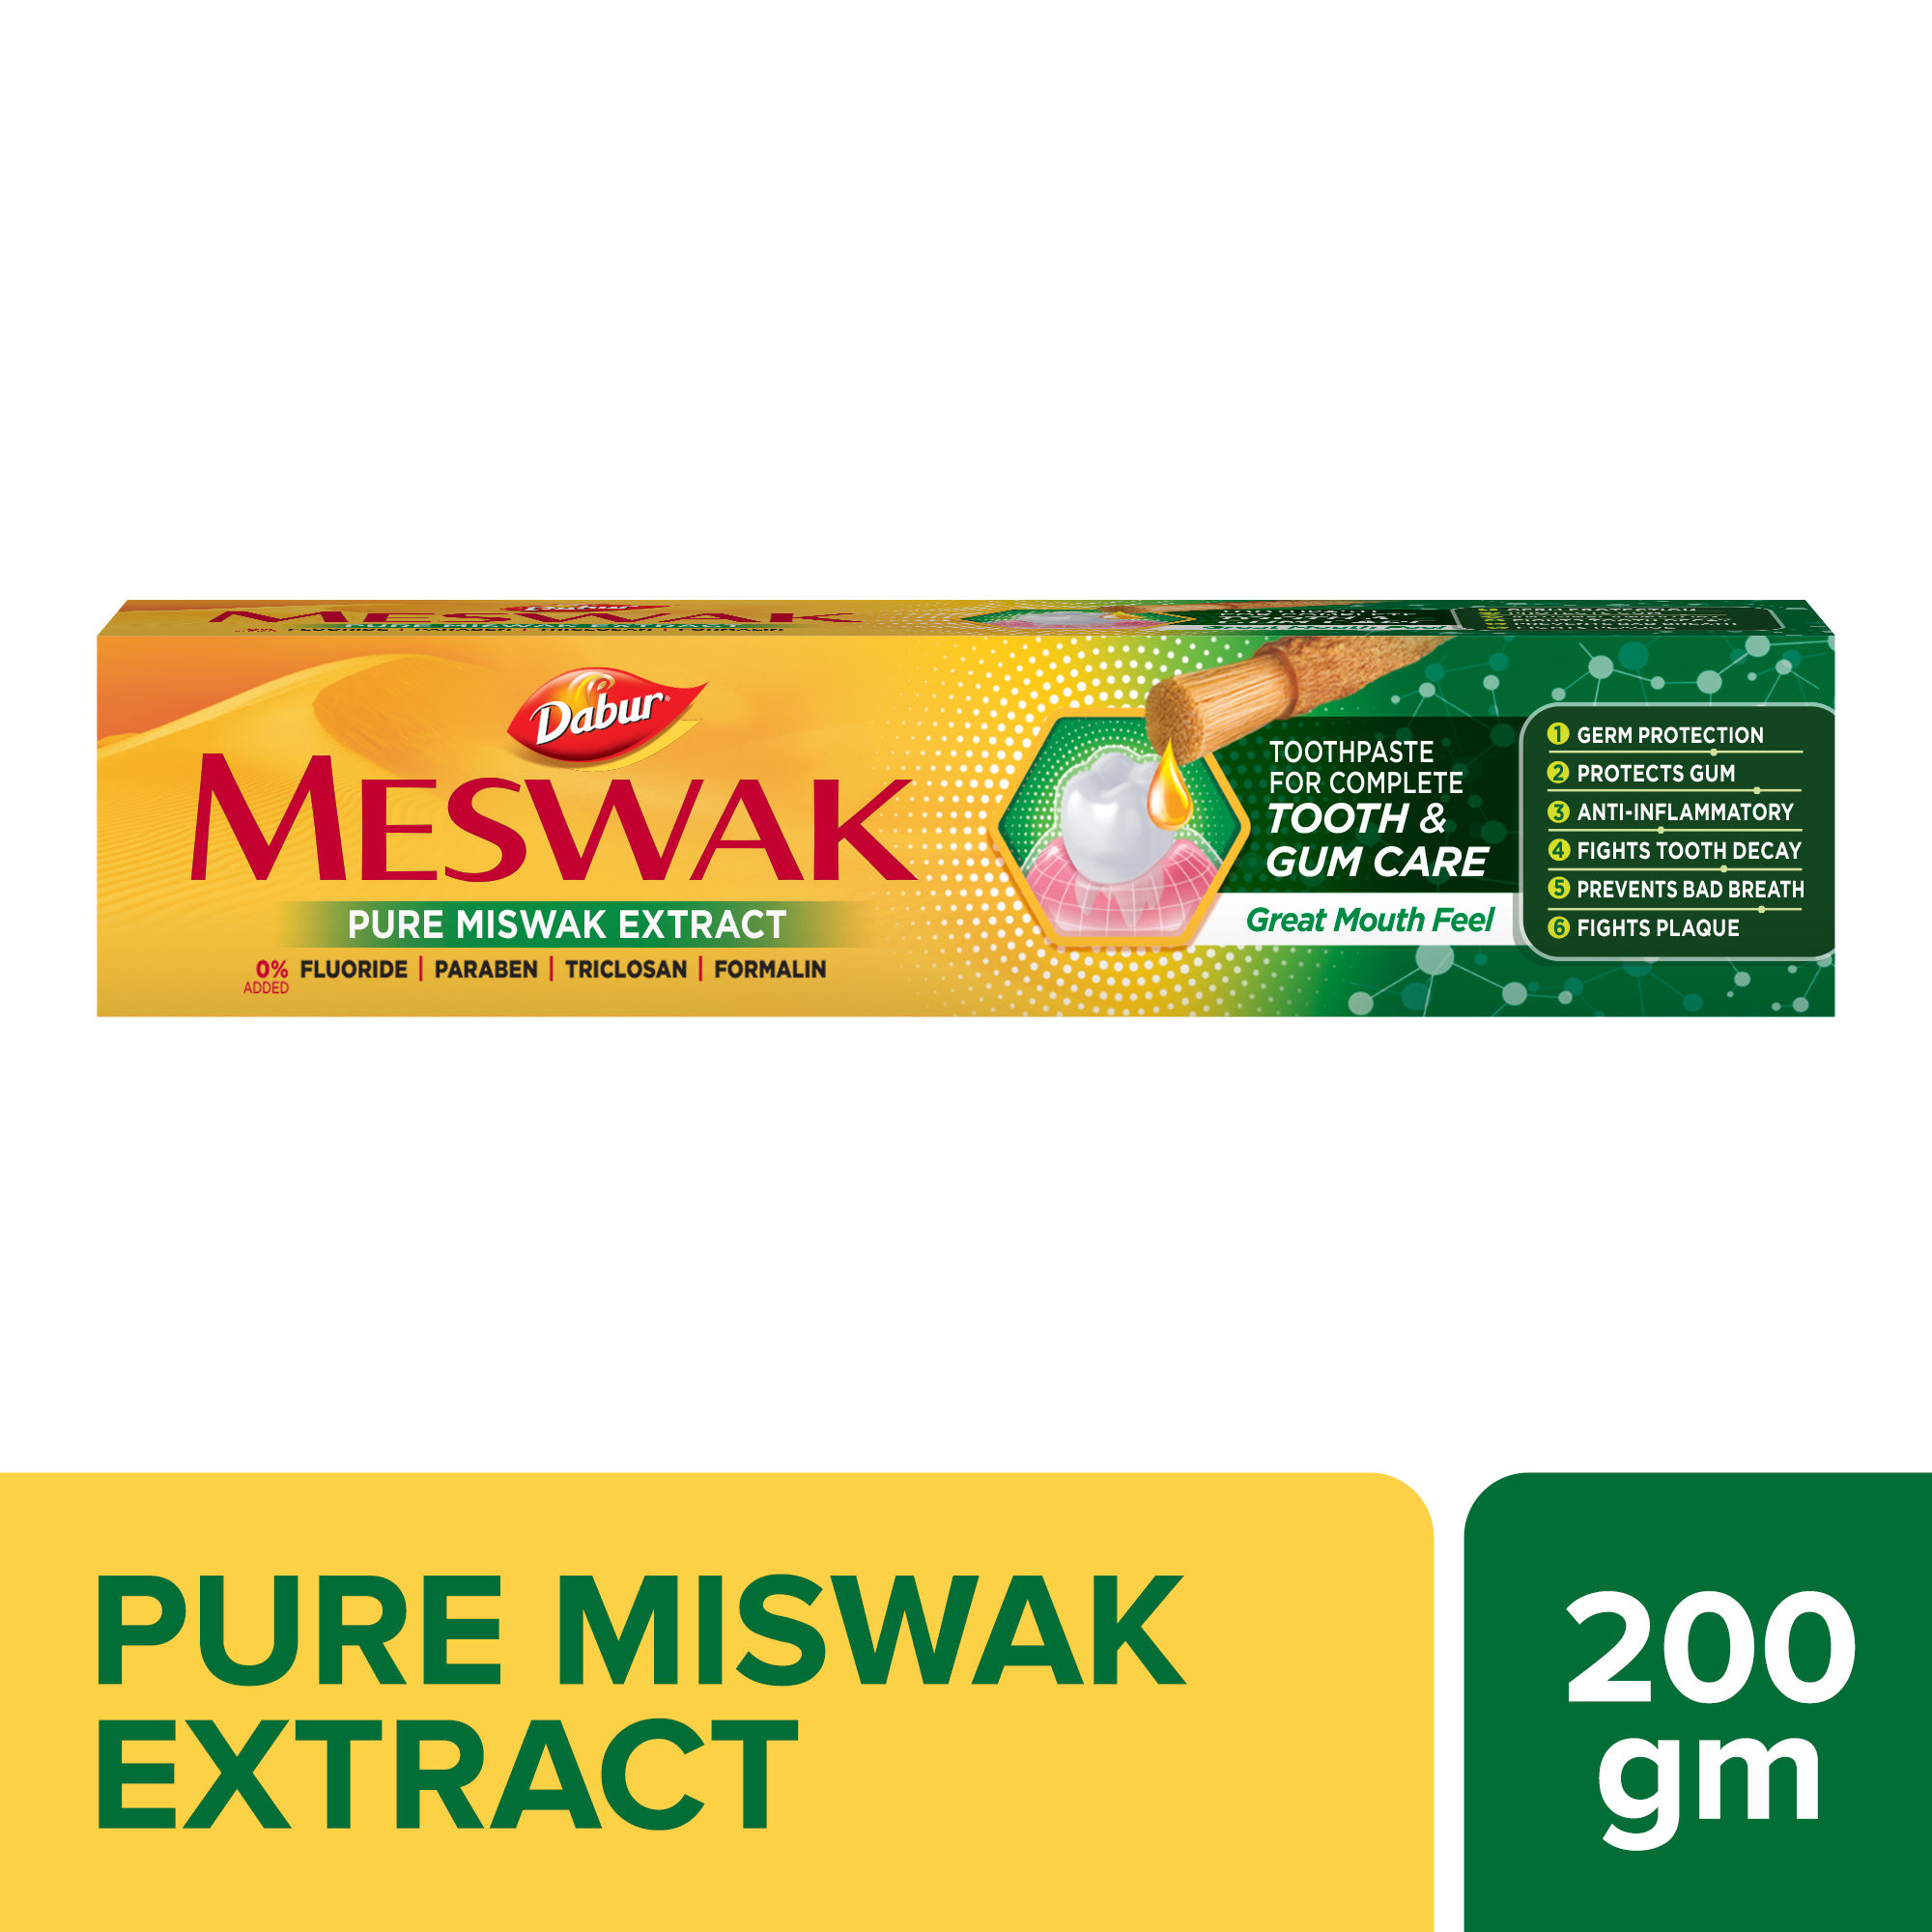 Dabur Meswak Pure Miswak Extract Complete Tooth & Gum Care Toothpaste